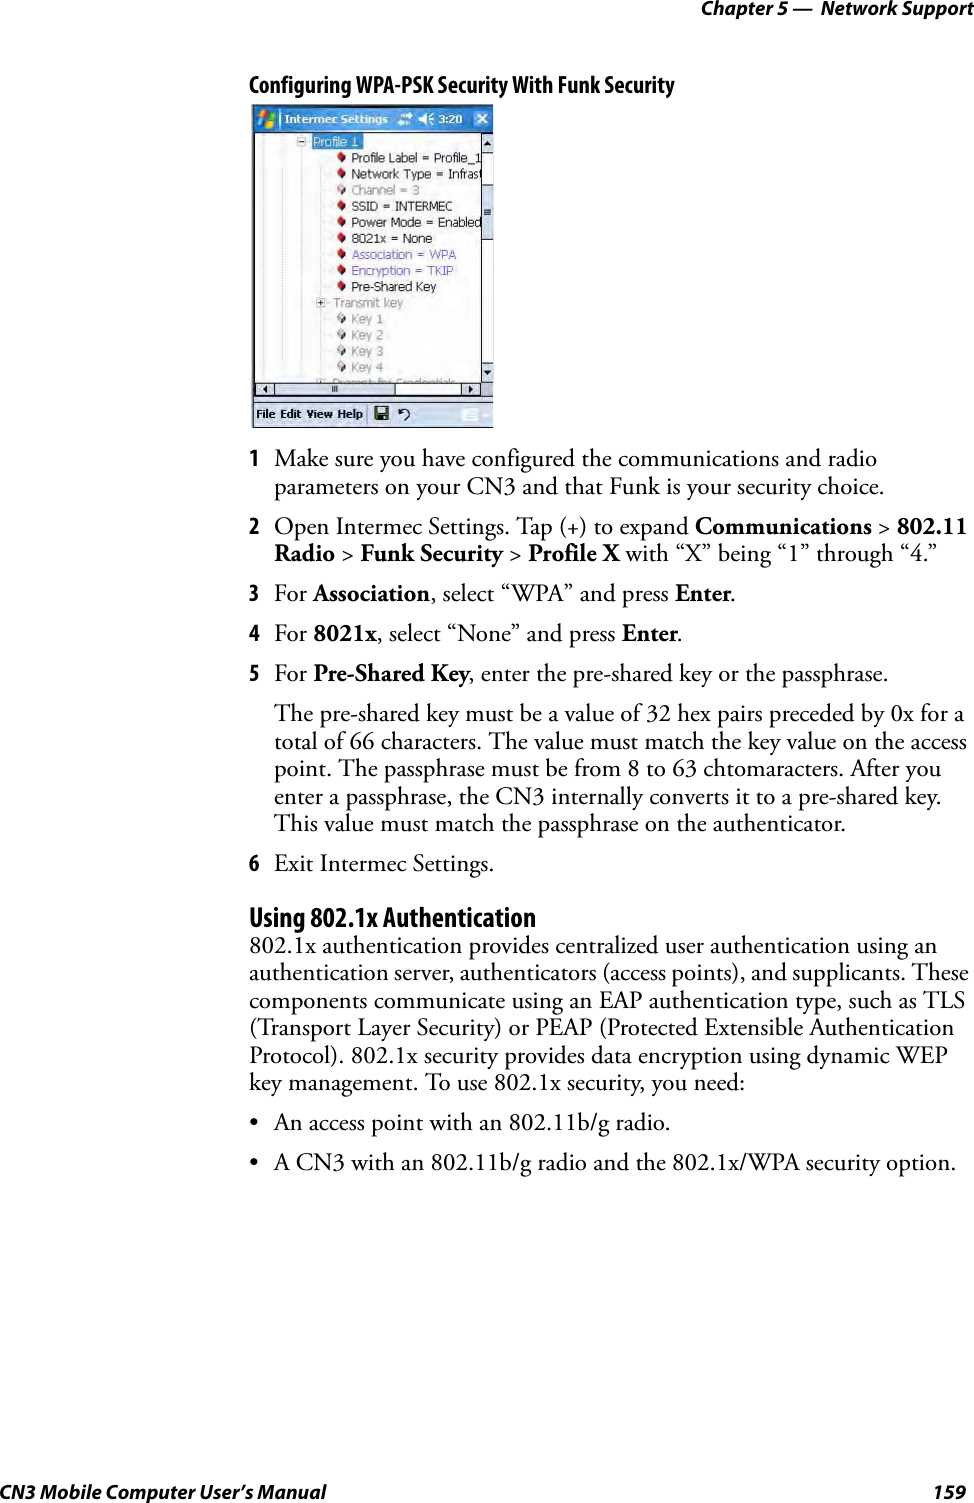 Chapter 5 —  Network SupportCN3 Mobile Computer User’s Manual 159Configuring WPA-PSK Security With Funk Security1Make sure you have configured the communications and radio parameters on your CN3 and that Funk is your security choice.2Open Intermec Settings. Tap (+) to expand Communications &gt; 802.11 Radio &gt; Funk Security &gt; Profile X with “X” being “1” through “4.”3For Association, select “WPA” and press Enter.4For 8021x, select “None” and press Enter.5For Pre-Shared Key, enter the pre-shared key or the passphrase.The pre-shared key must be a value of 32 hex pairs preceded by 0x for a total of 66 characters. The value must match the key value on the access point. The passphrase must be from 8 to 63 chtomaracters. After you enter a passphrase, the CN3 internally converts it to a pre-shared key. This value must match the passphrase on the authenticator.6Exit Intermec Settings.Using 802.1x Authentication802.1x authentication provides centralized user authentication using an authentication server, authenticators (access points), and supplicants. These components communicate using an EAP authentication type, such as TLS (Transport Layer Security) or PEAP (Protected Extensible Authentication Protocol). 802.1x security provides data encryption using dynamic WEP key management. To use 802.1x security, you need:• An access point with an 802.11b/g radio.• A CN3 with an 802.11b/g radio and the 802.1x/WPA security option.